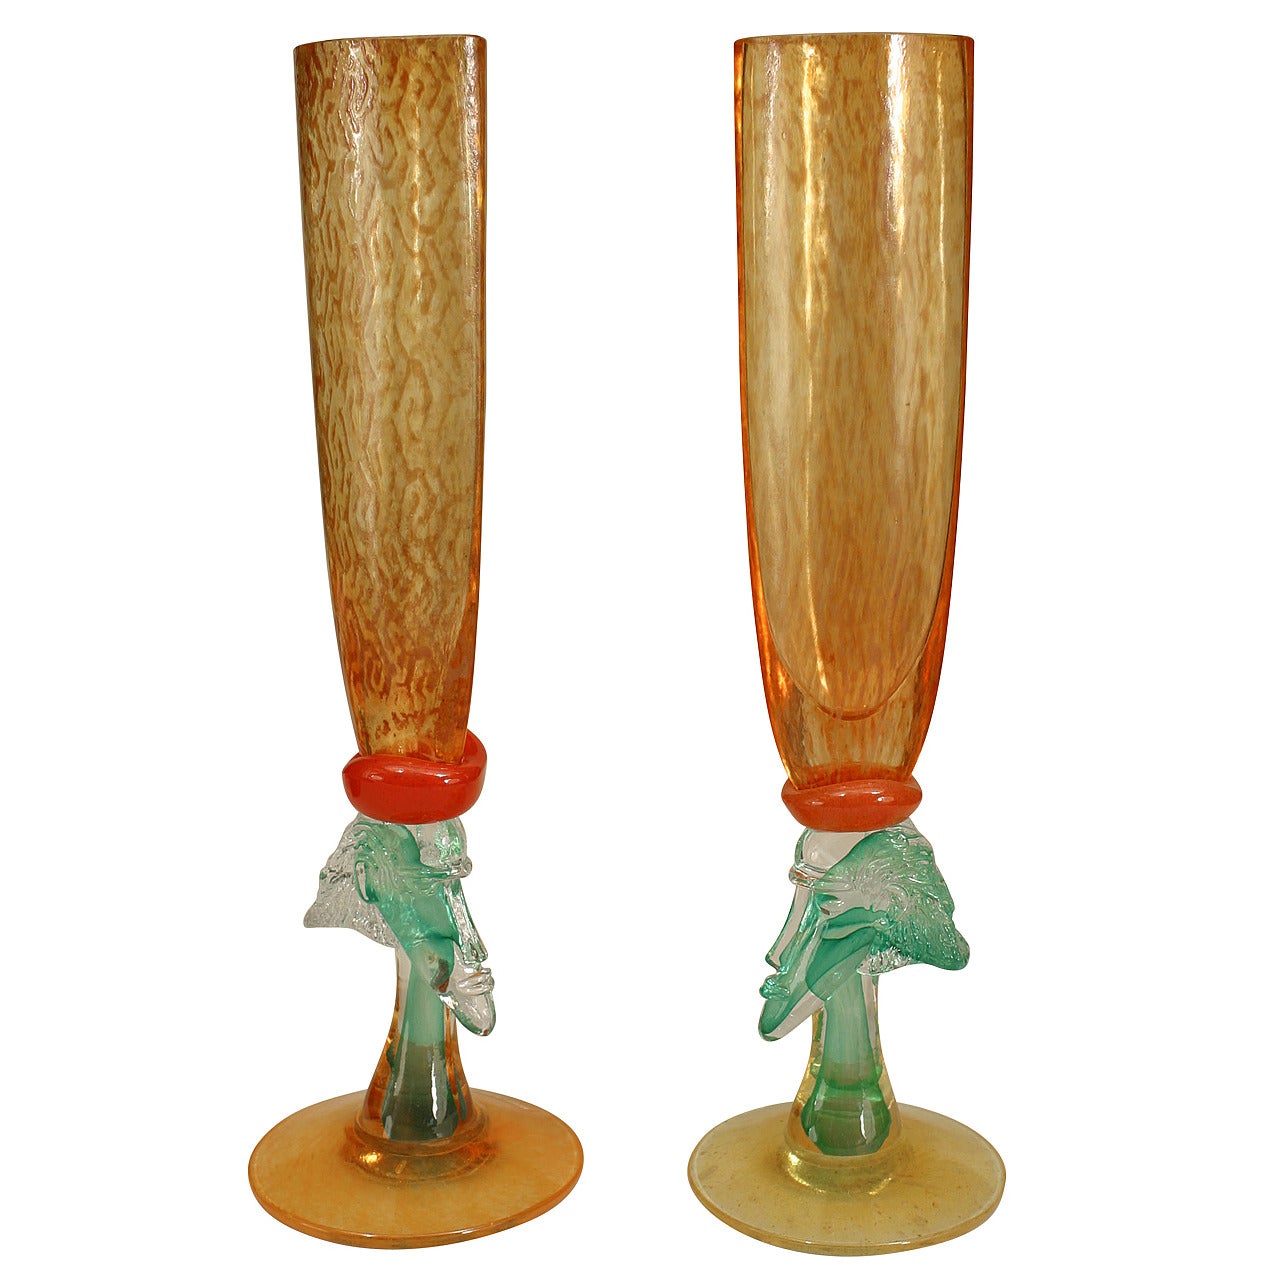 Pair of Swedish Sculptural Champagne Flutes by Kosta Boda